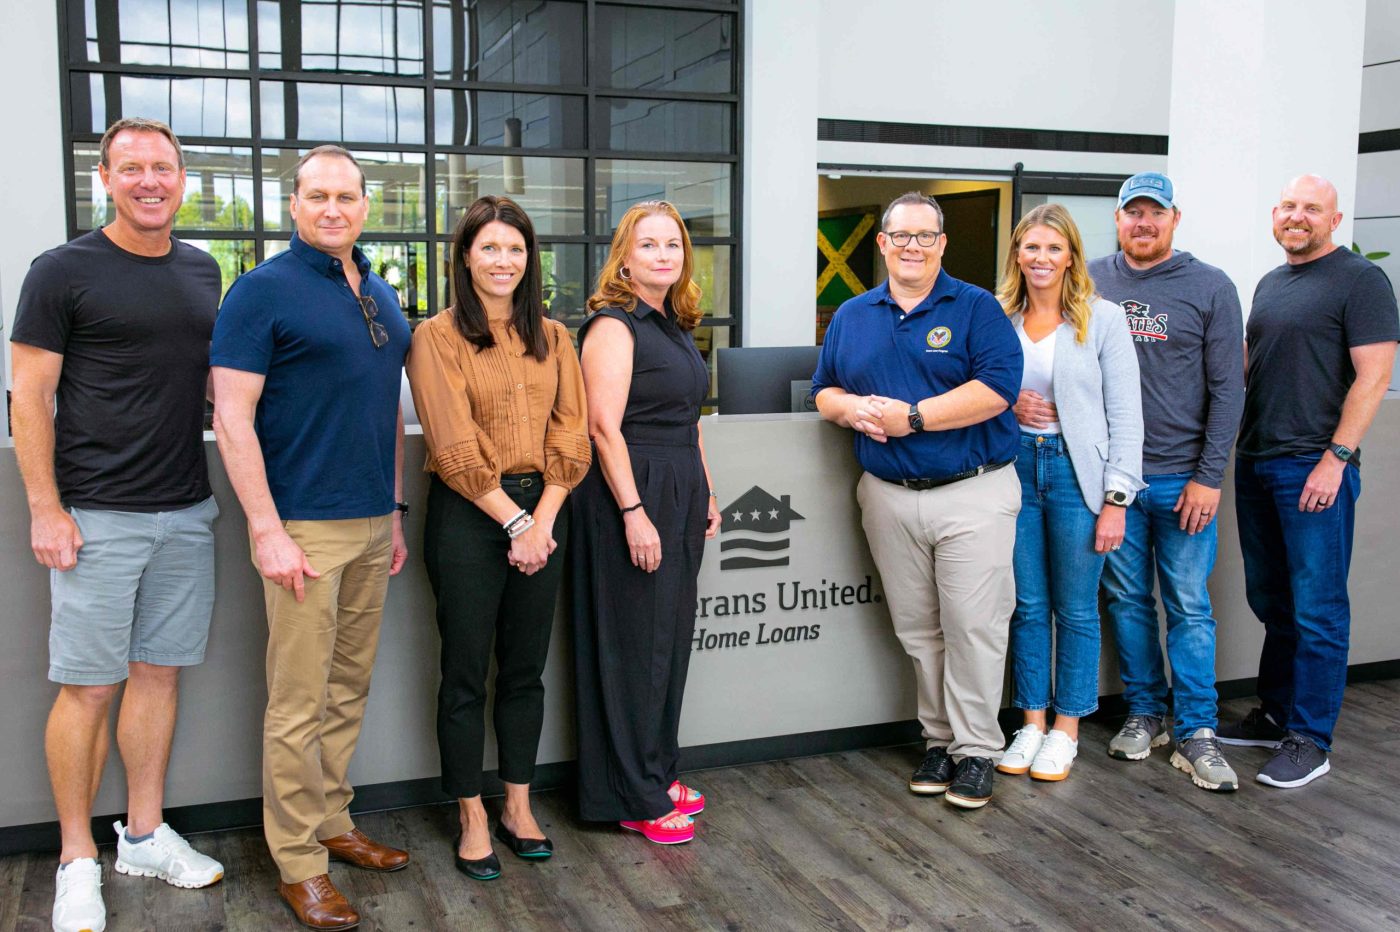 VA's Loan Guaranty Service recently met with Veterans United Home Loans to share how it can help Veterans overcome current challenges in the housing market.